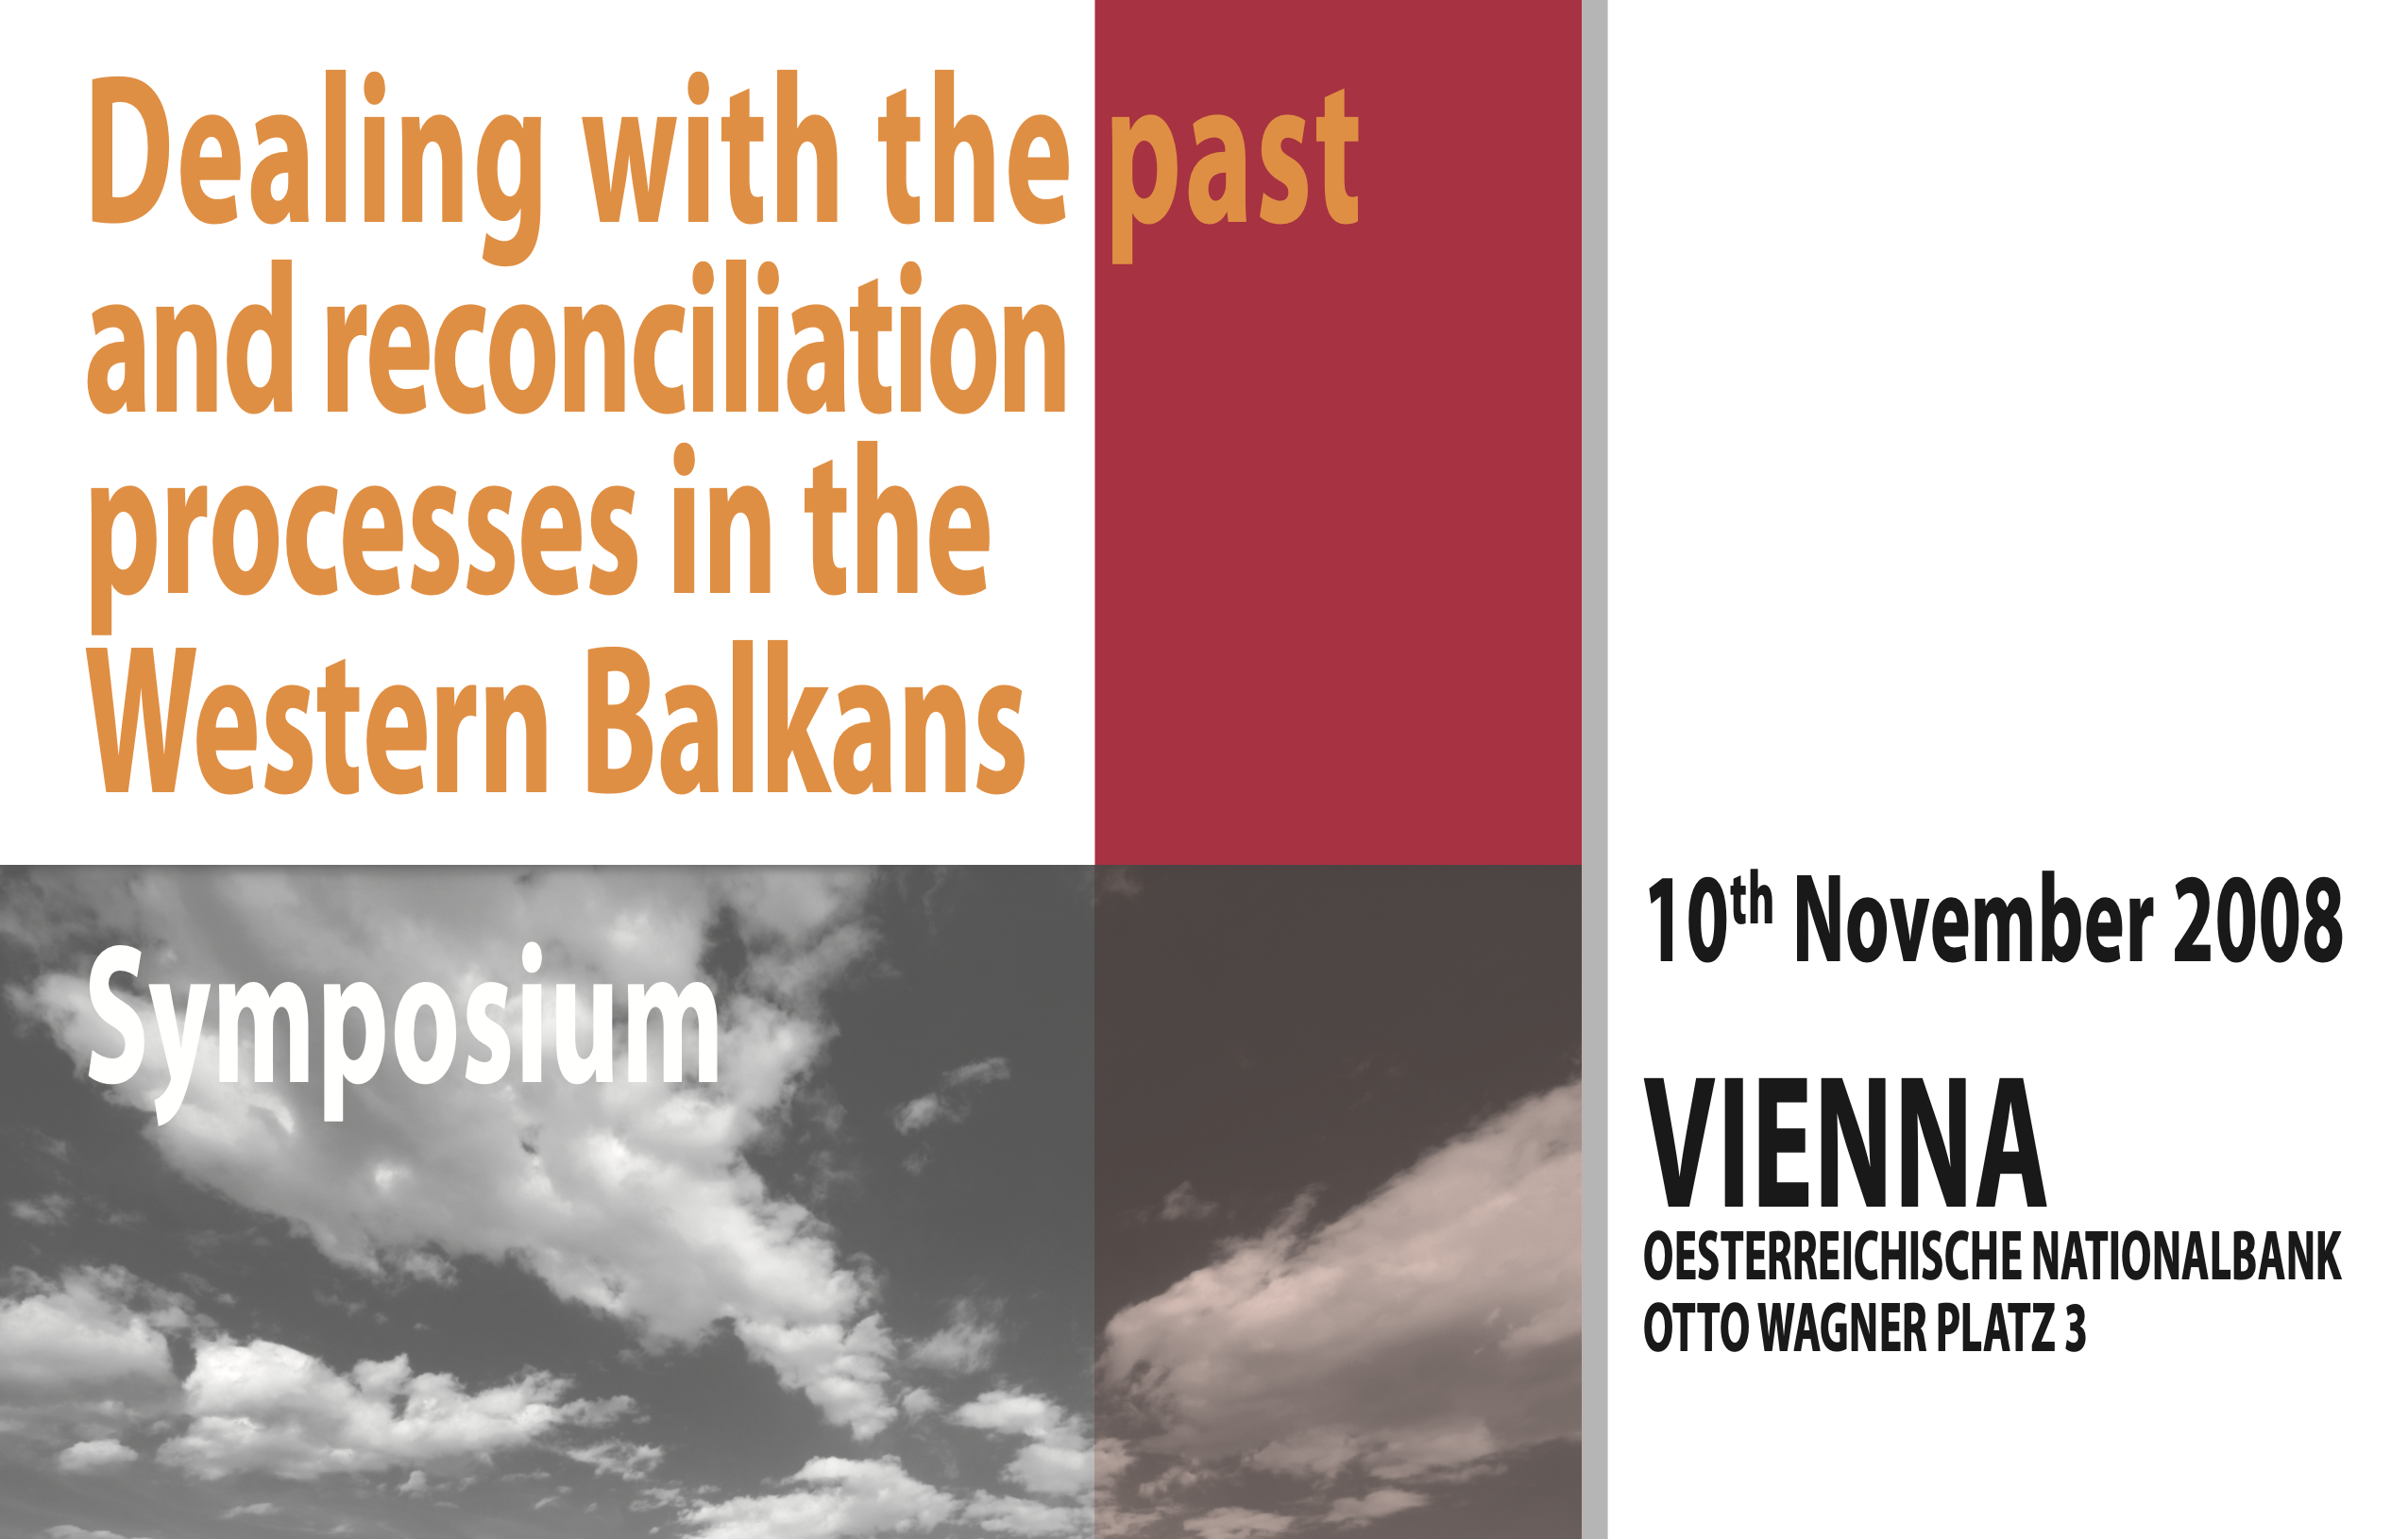 Dealing with the past and reconciliation processes in the Western Balkans